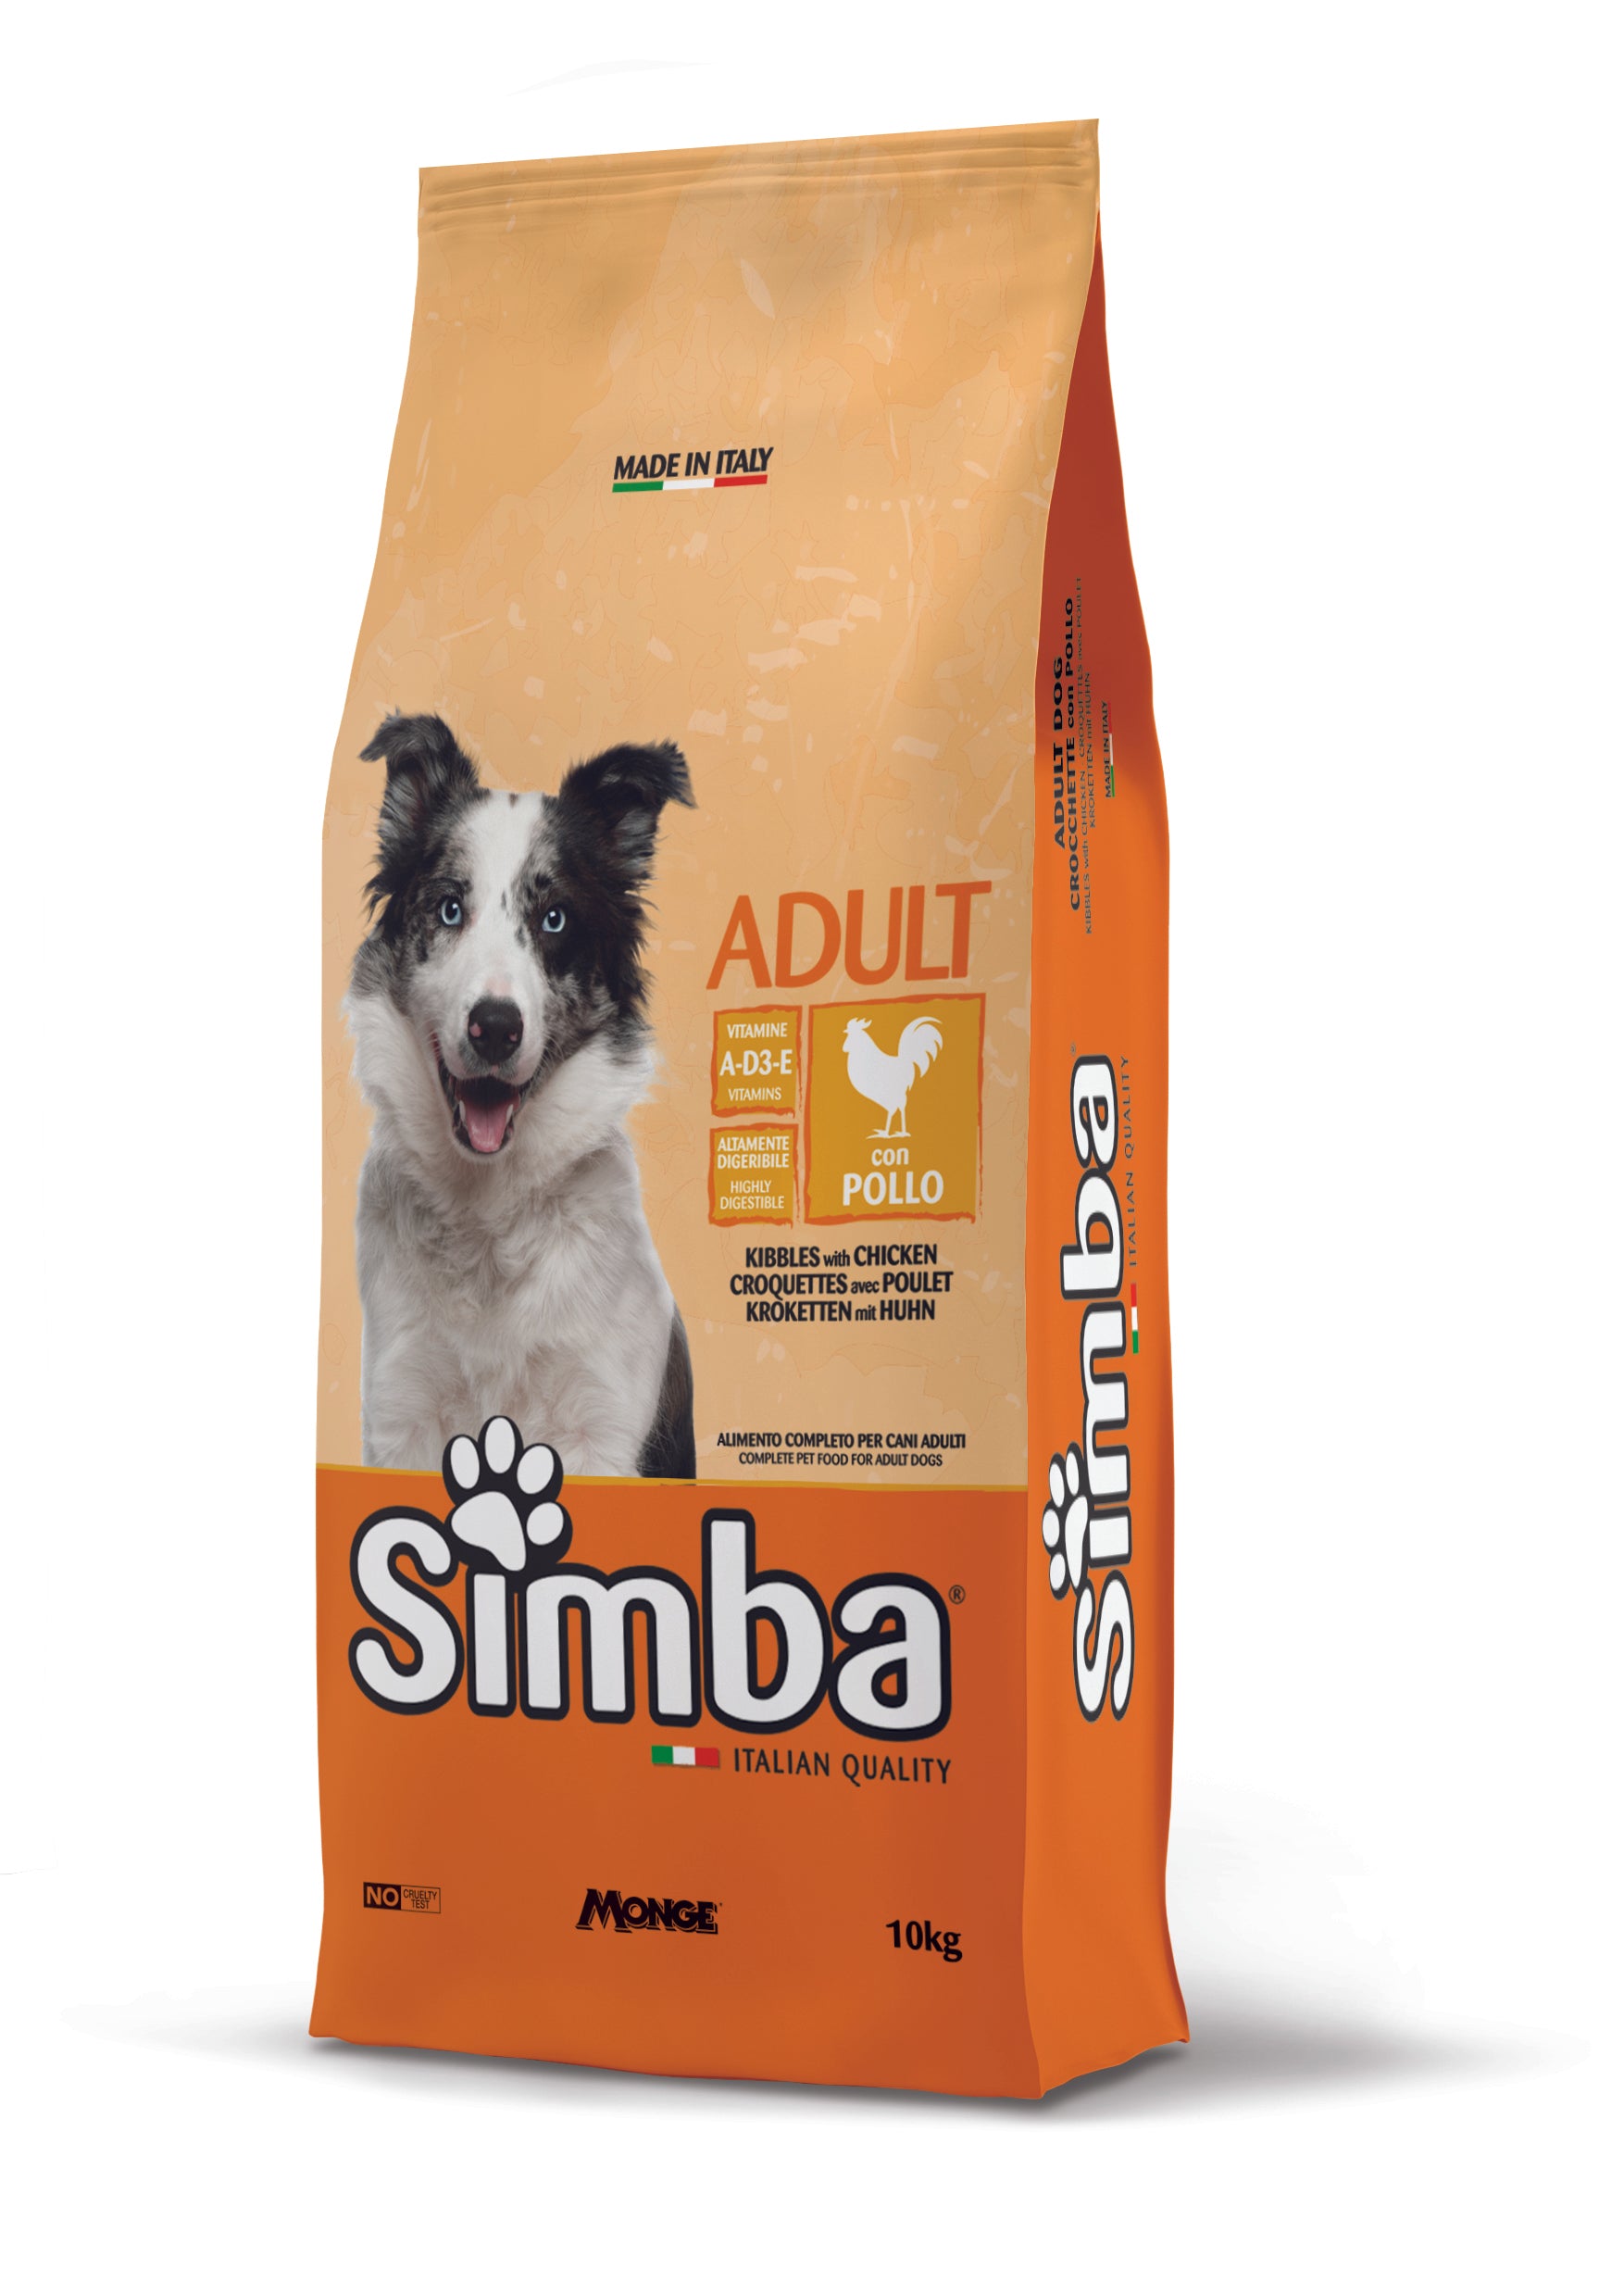 Monge Simba Chicken Dog Food for Adult Dog 10 KG All Breed